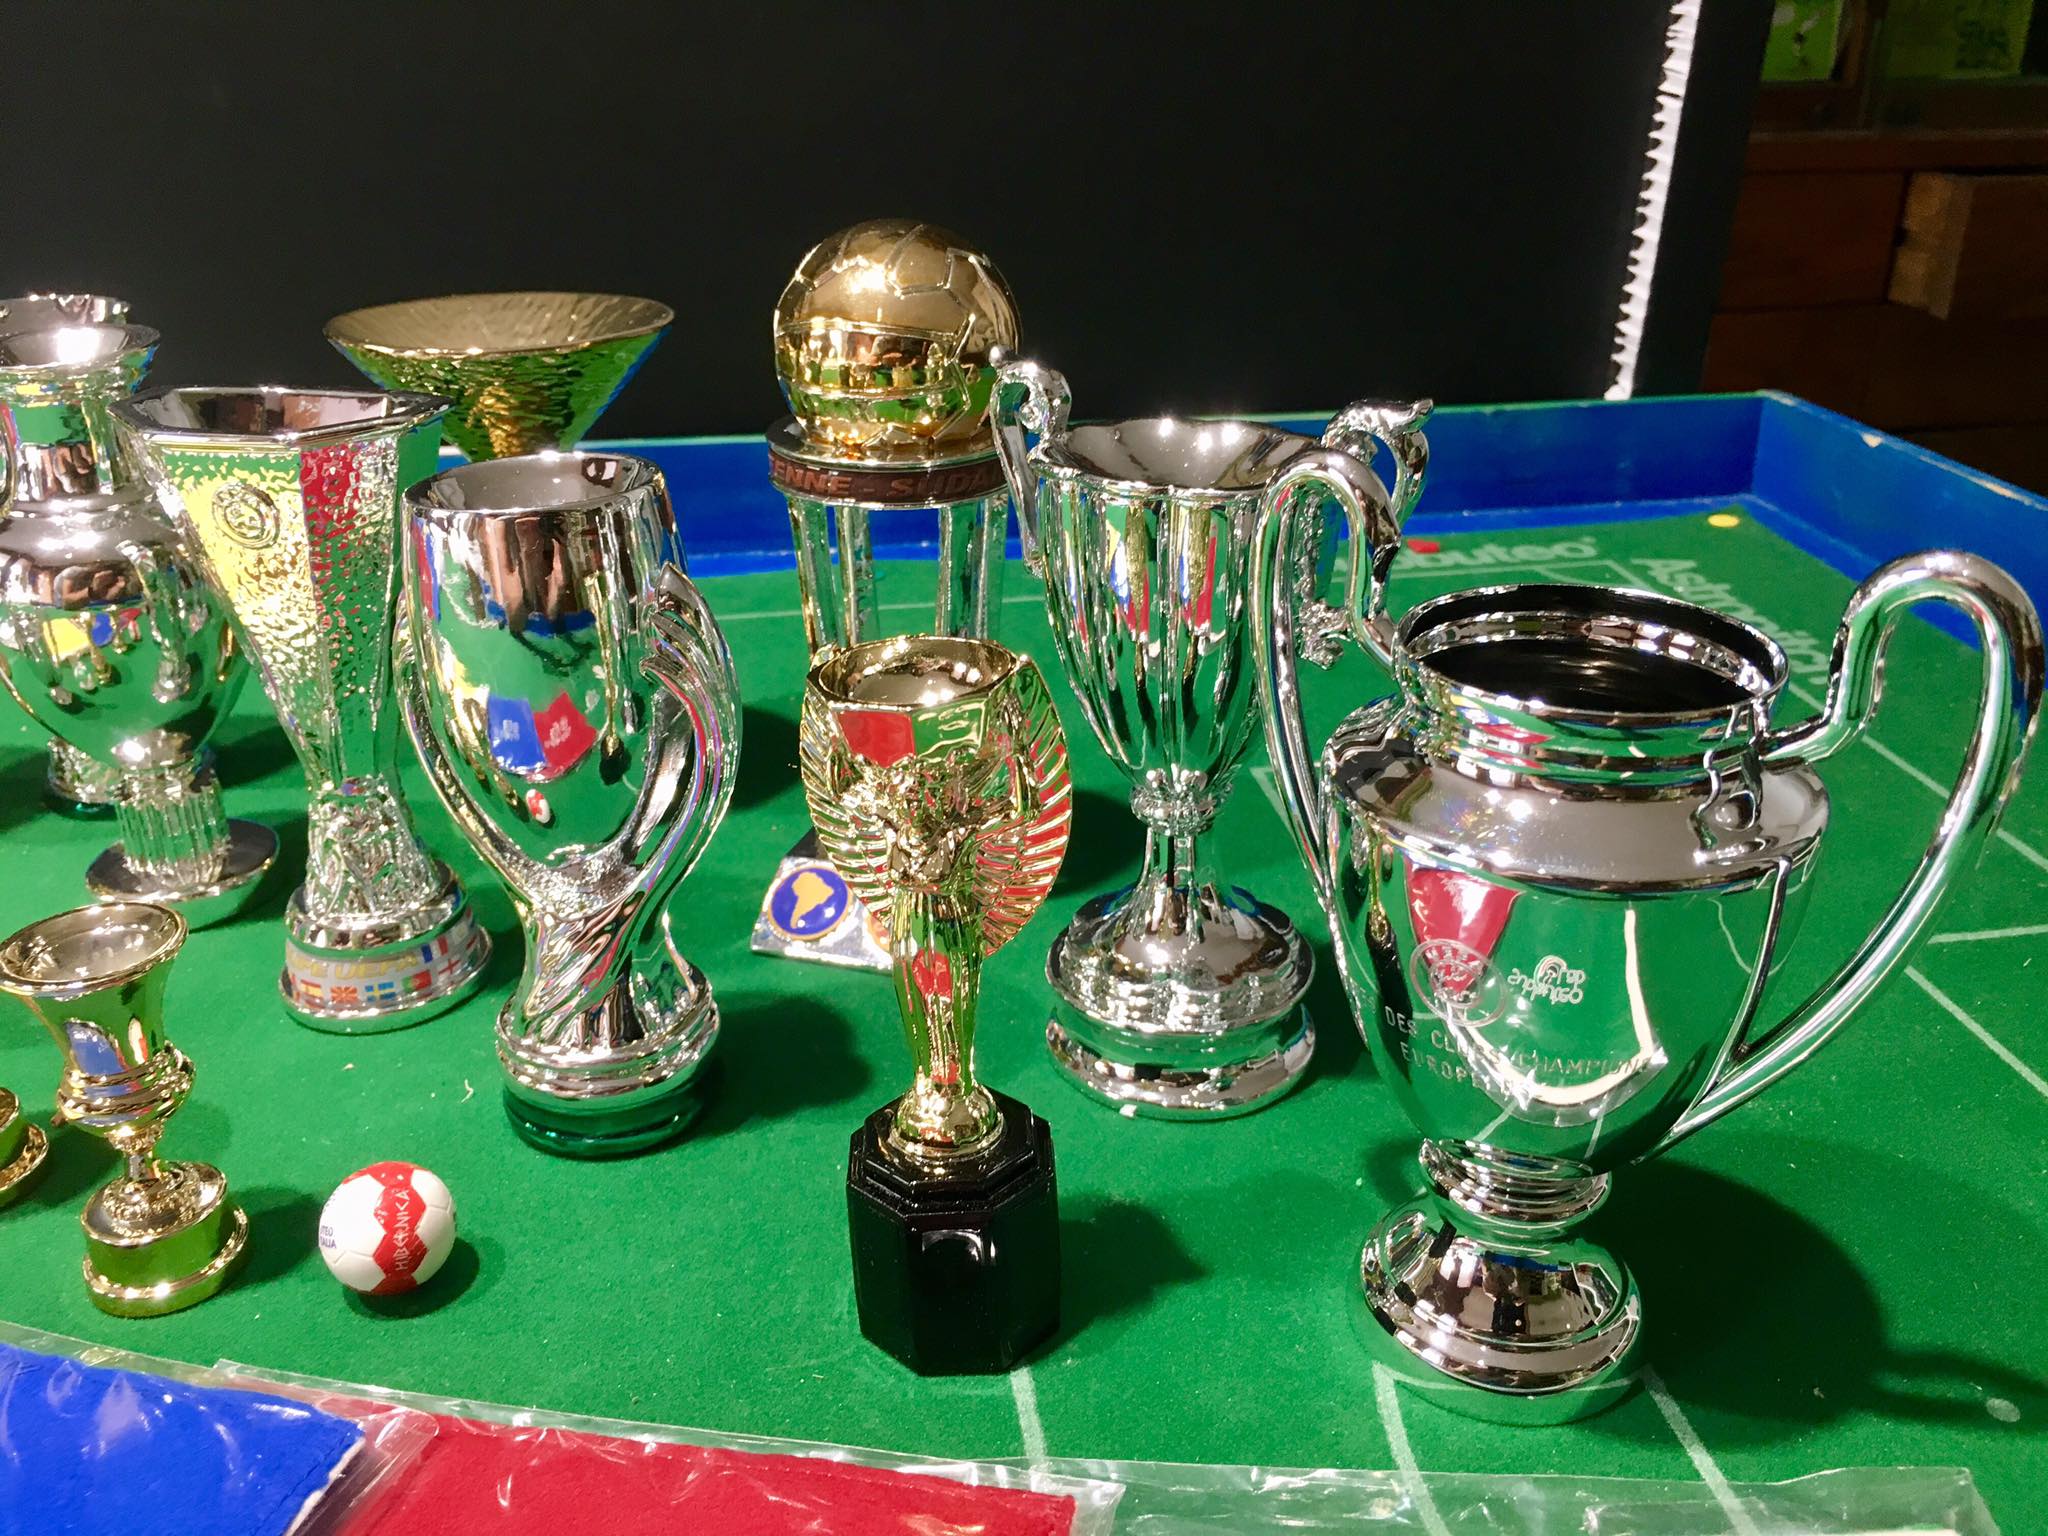 New Range Of Subbuteo Trophies Revealed And They Include The Champions League Subbuteo Online